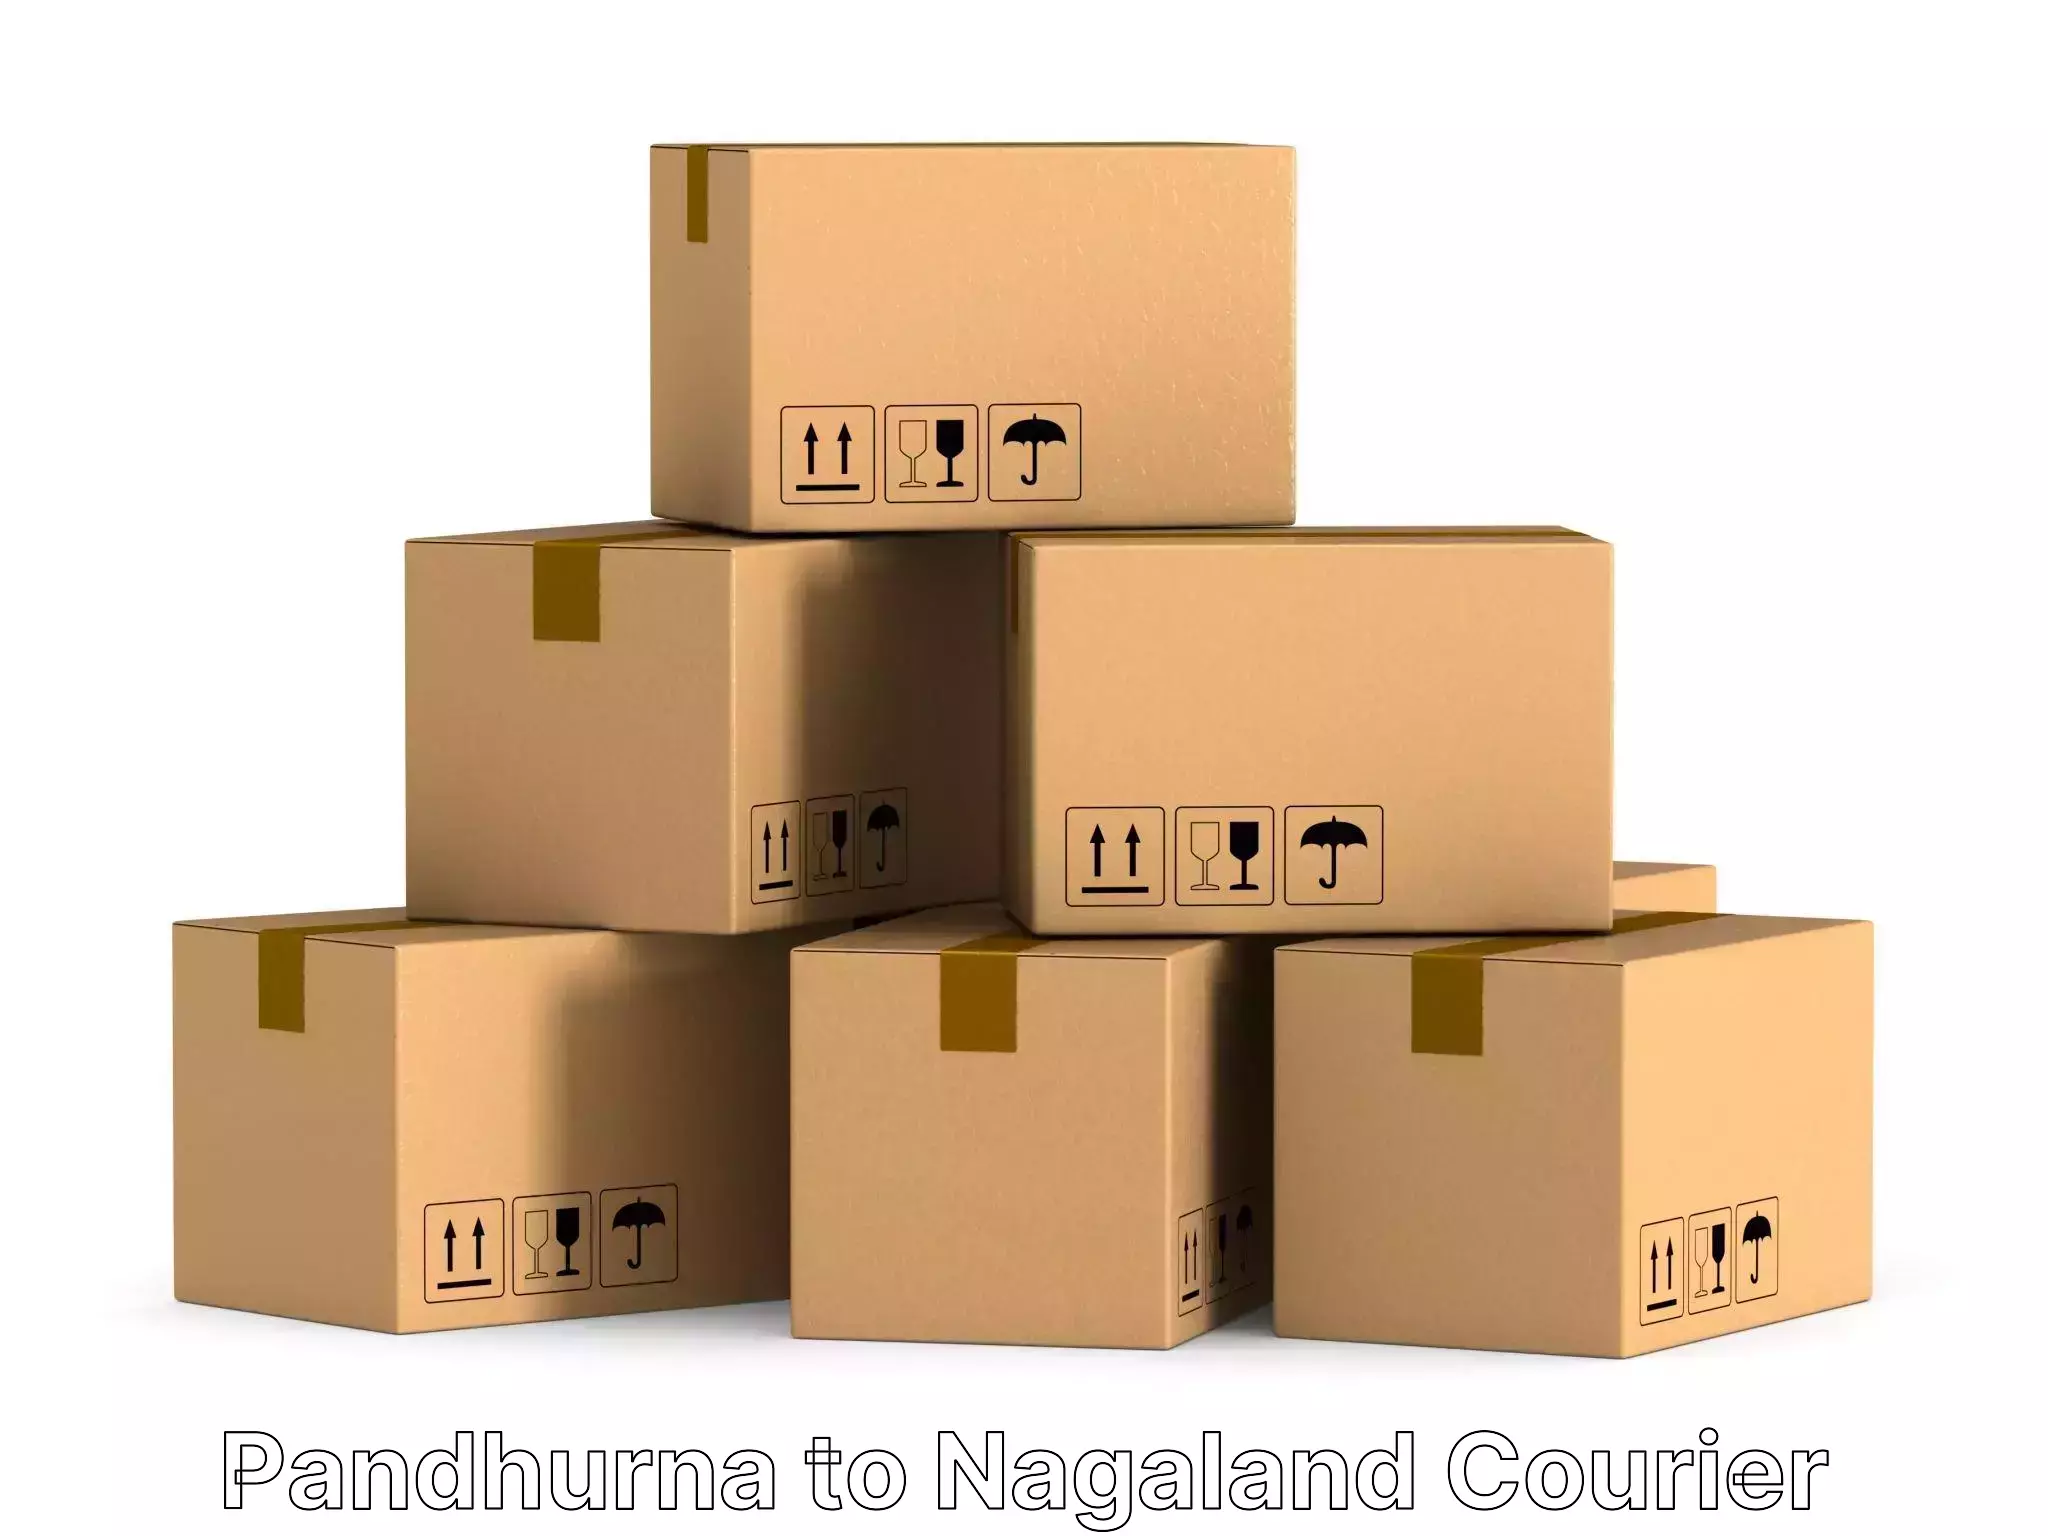 Quality relocation services in Pandhurna to Dimapur